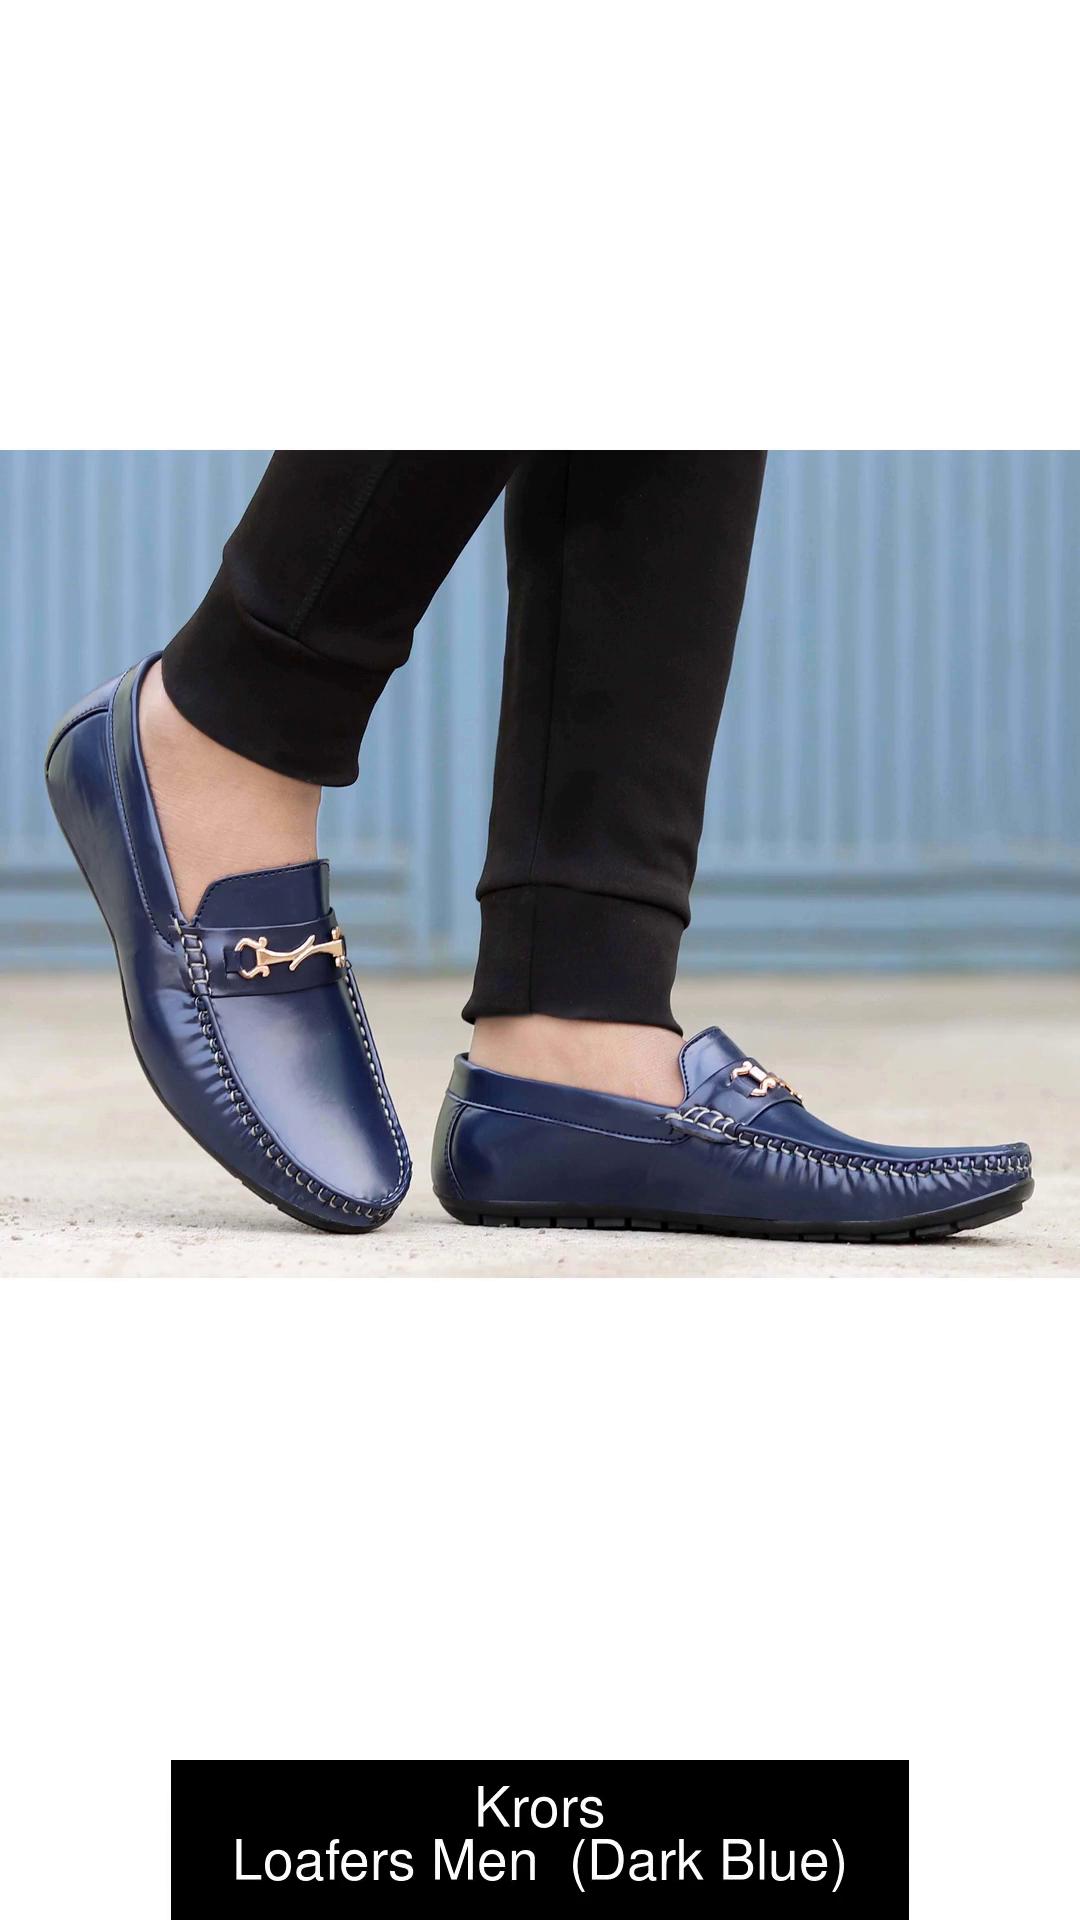 Krors Latest Stylish Casual/Formal/Office/Outdoor/Casual Loafers For Men Buy Krors Latest Stylish Casual/Formal/Office/Outdoor/Casual Shoes Loafers For Men Online at Best Price - Shop Online for Footwears in India |